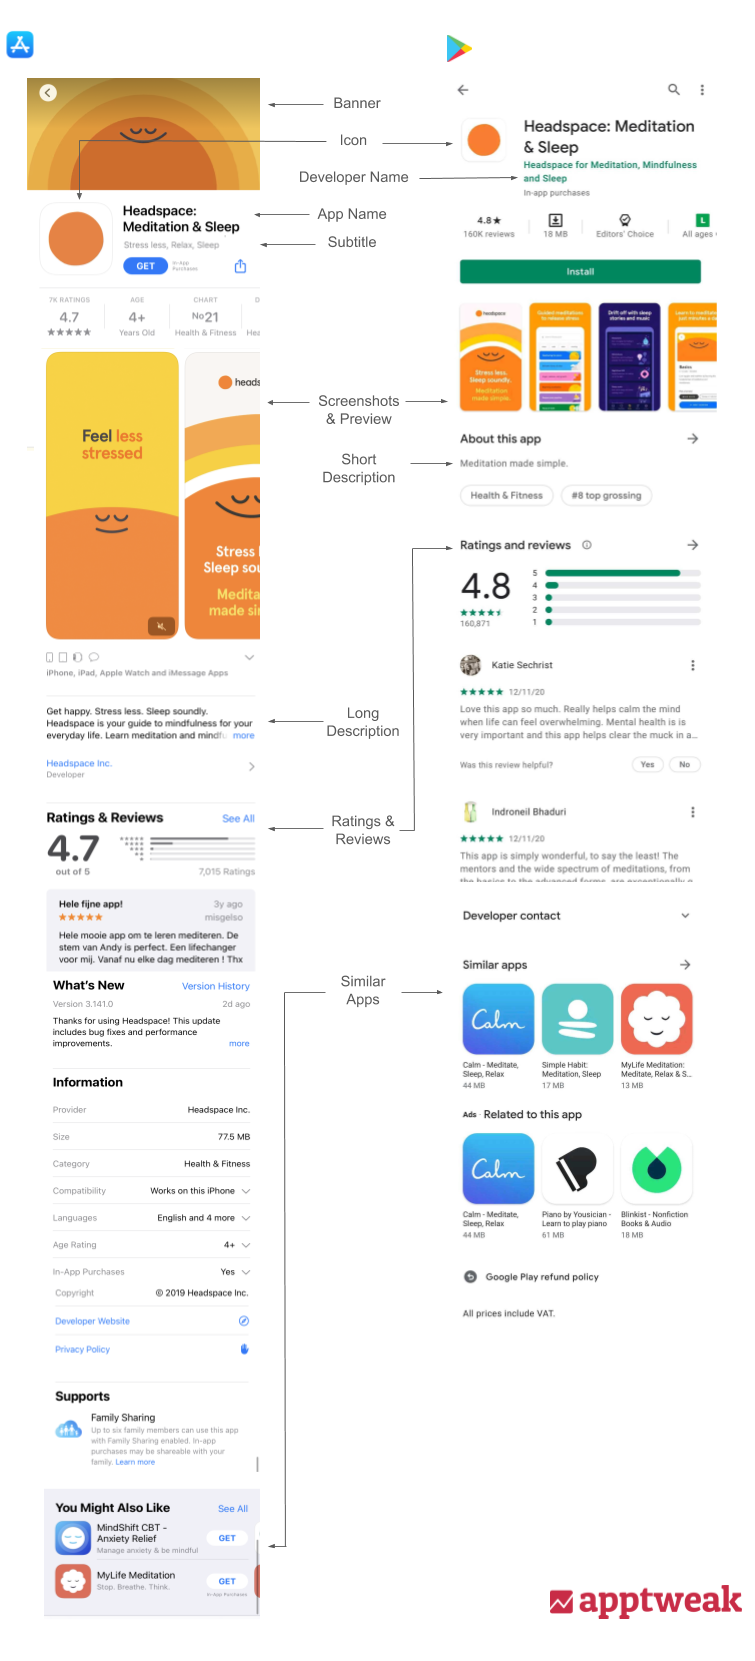 An overview of what the app product page of Headspace looks like in the Apple App Store vs the Google Play Store.